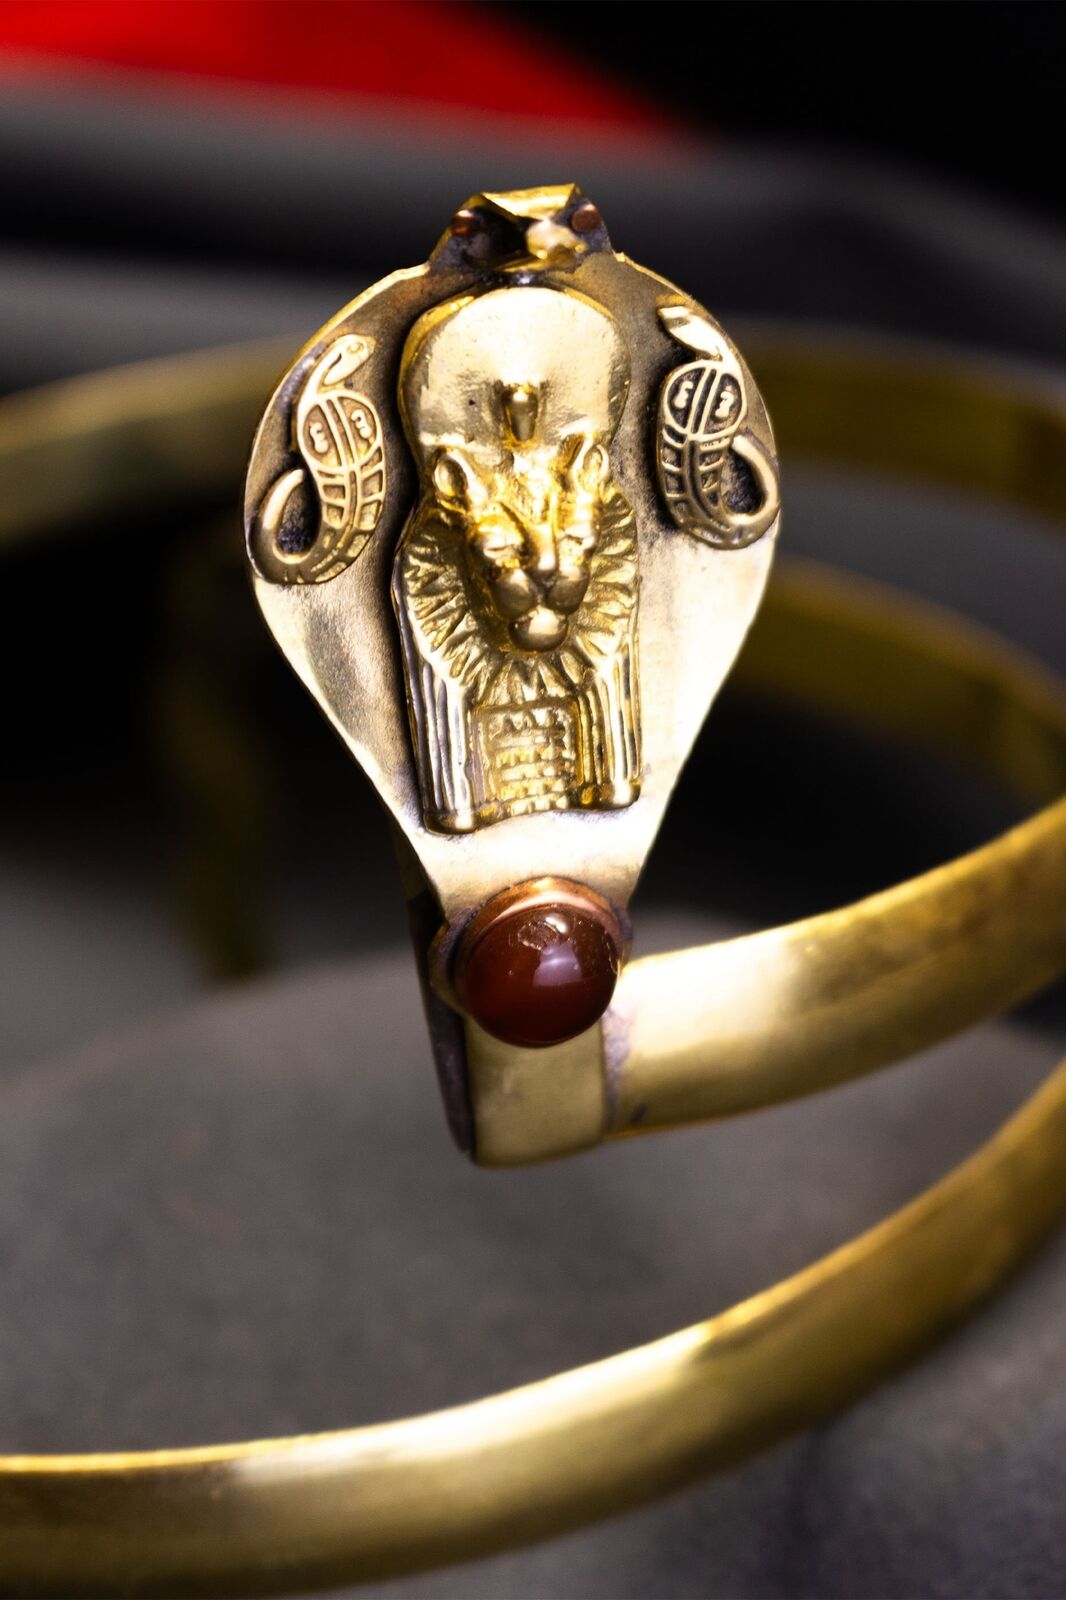 Egyptian crown with the cobra and Goddess Sekhmet, made in Egypt with care